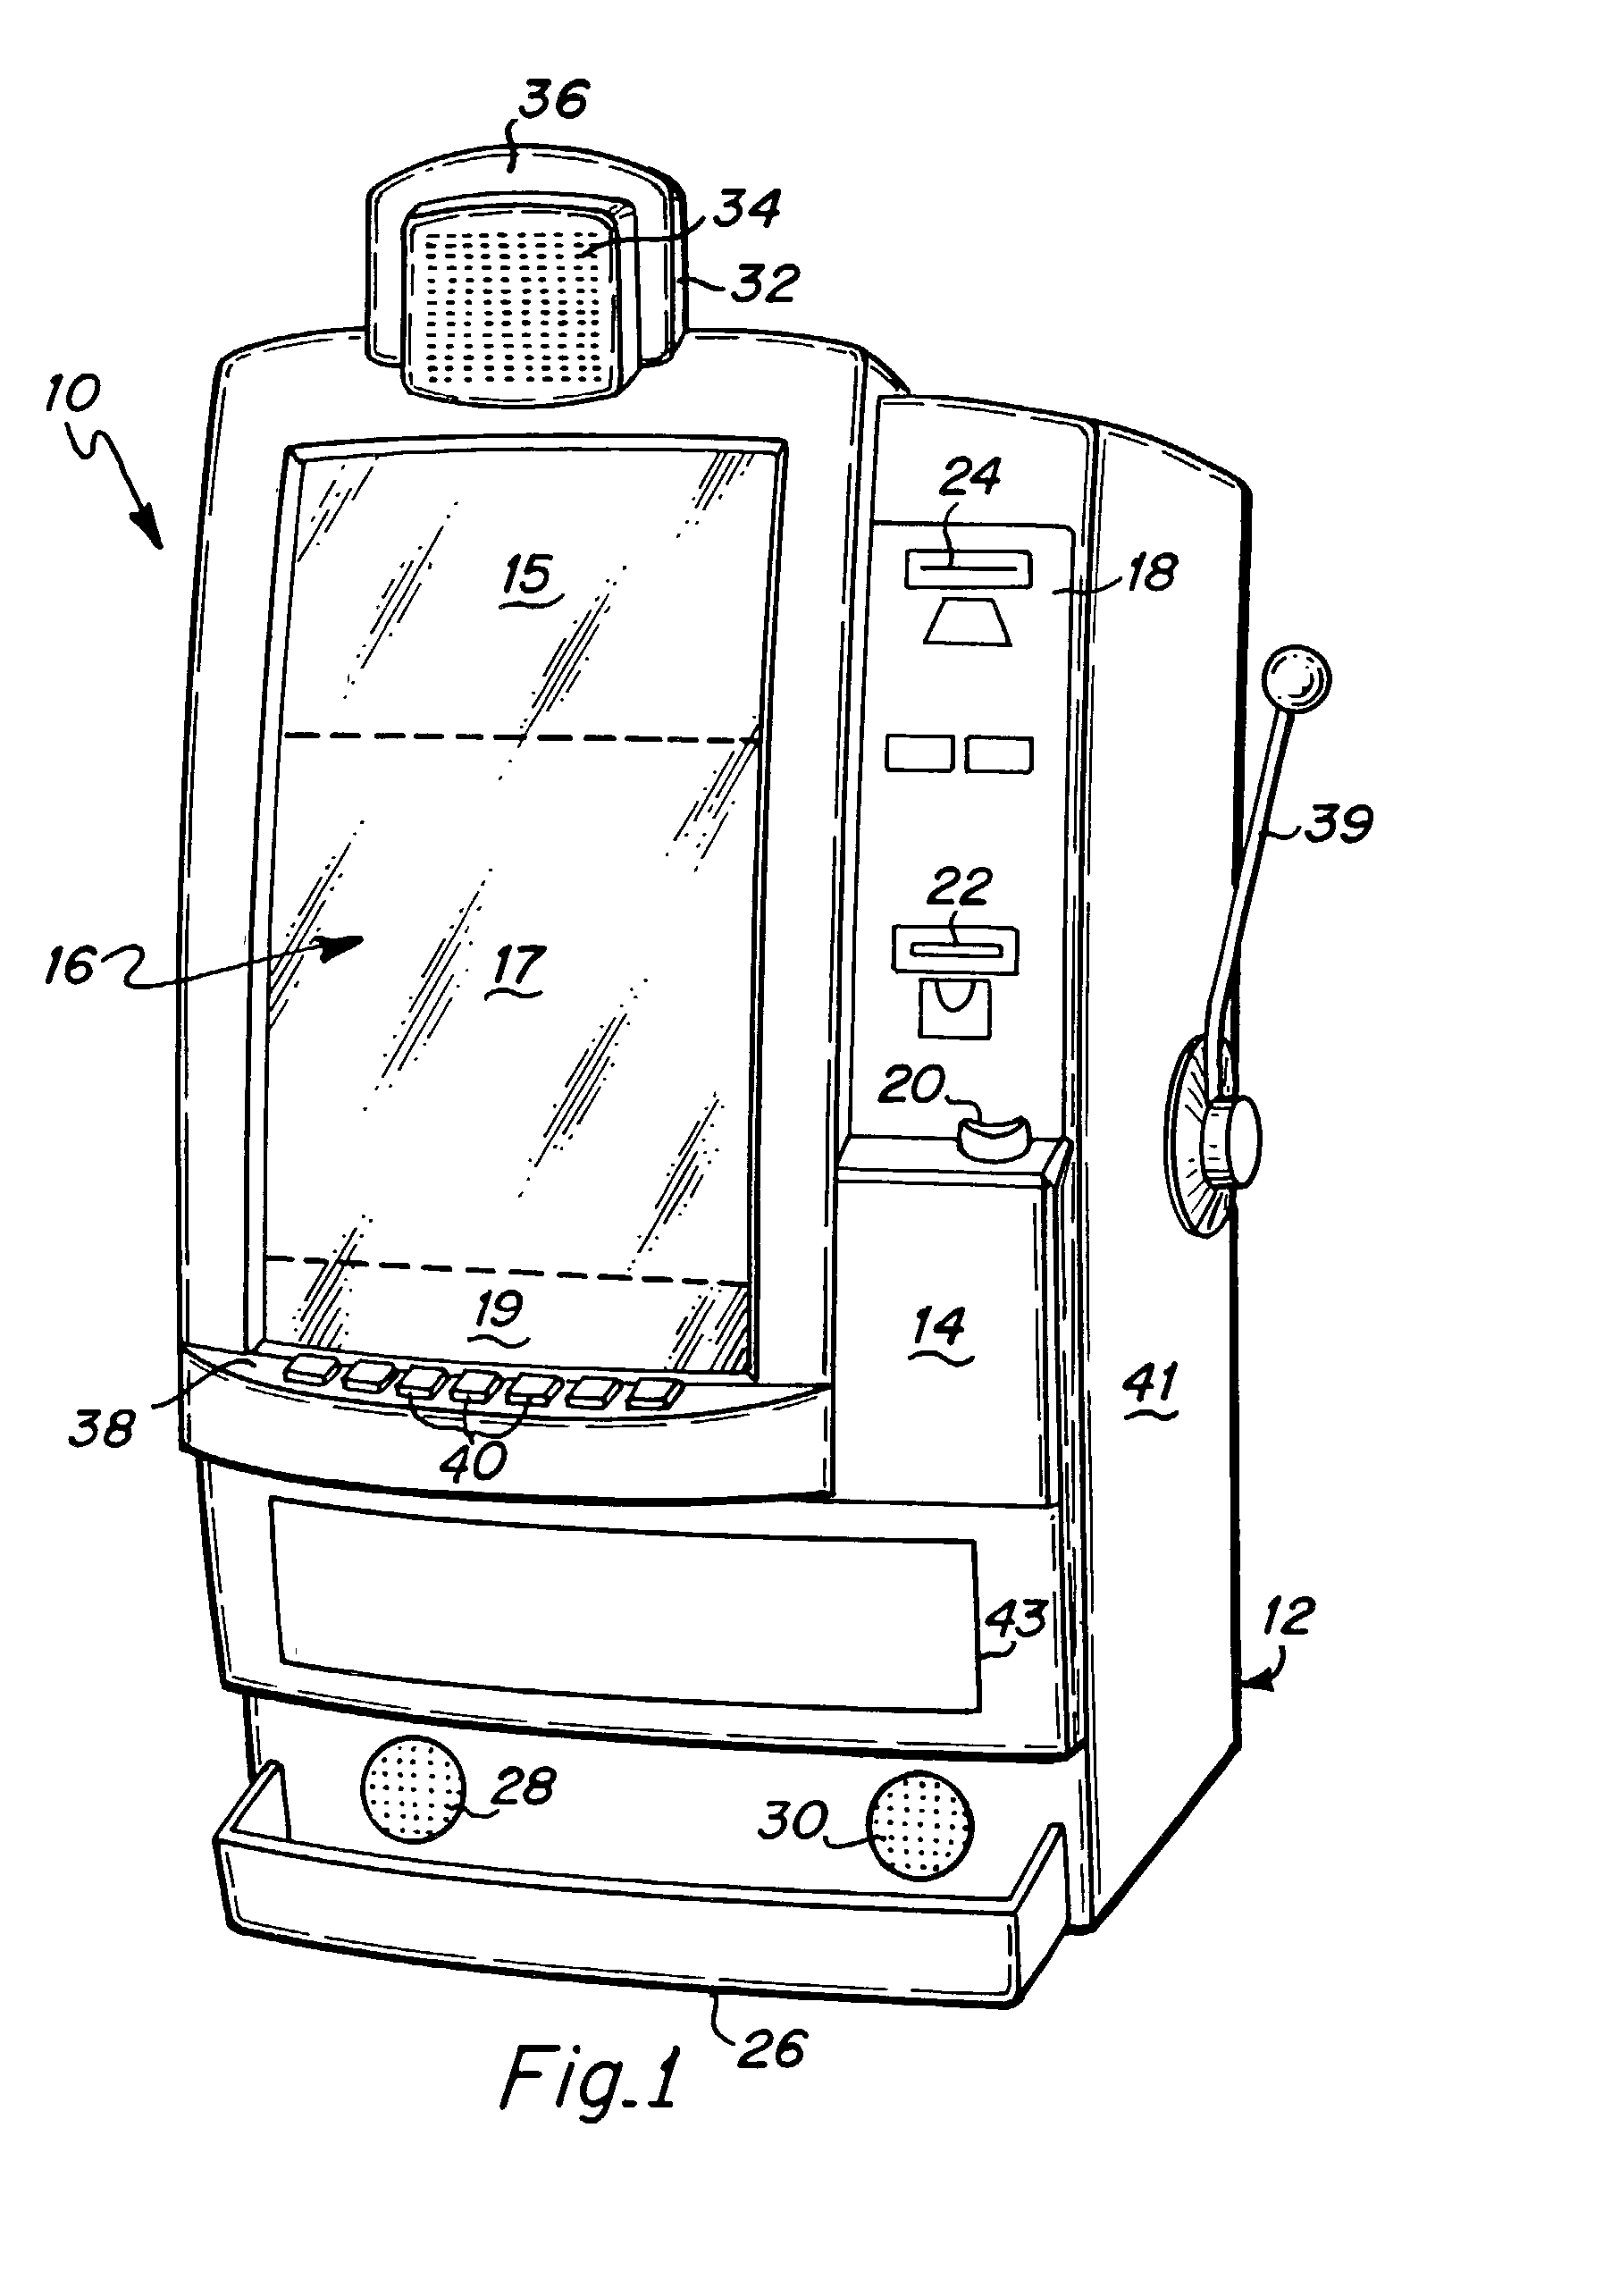 Gaming apparatus with portrait-mode display